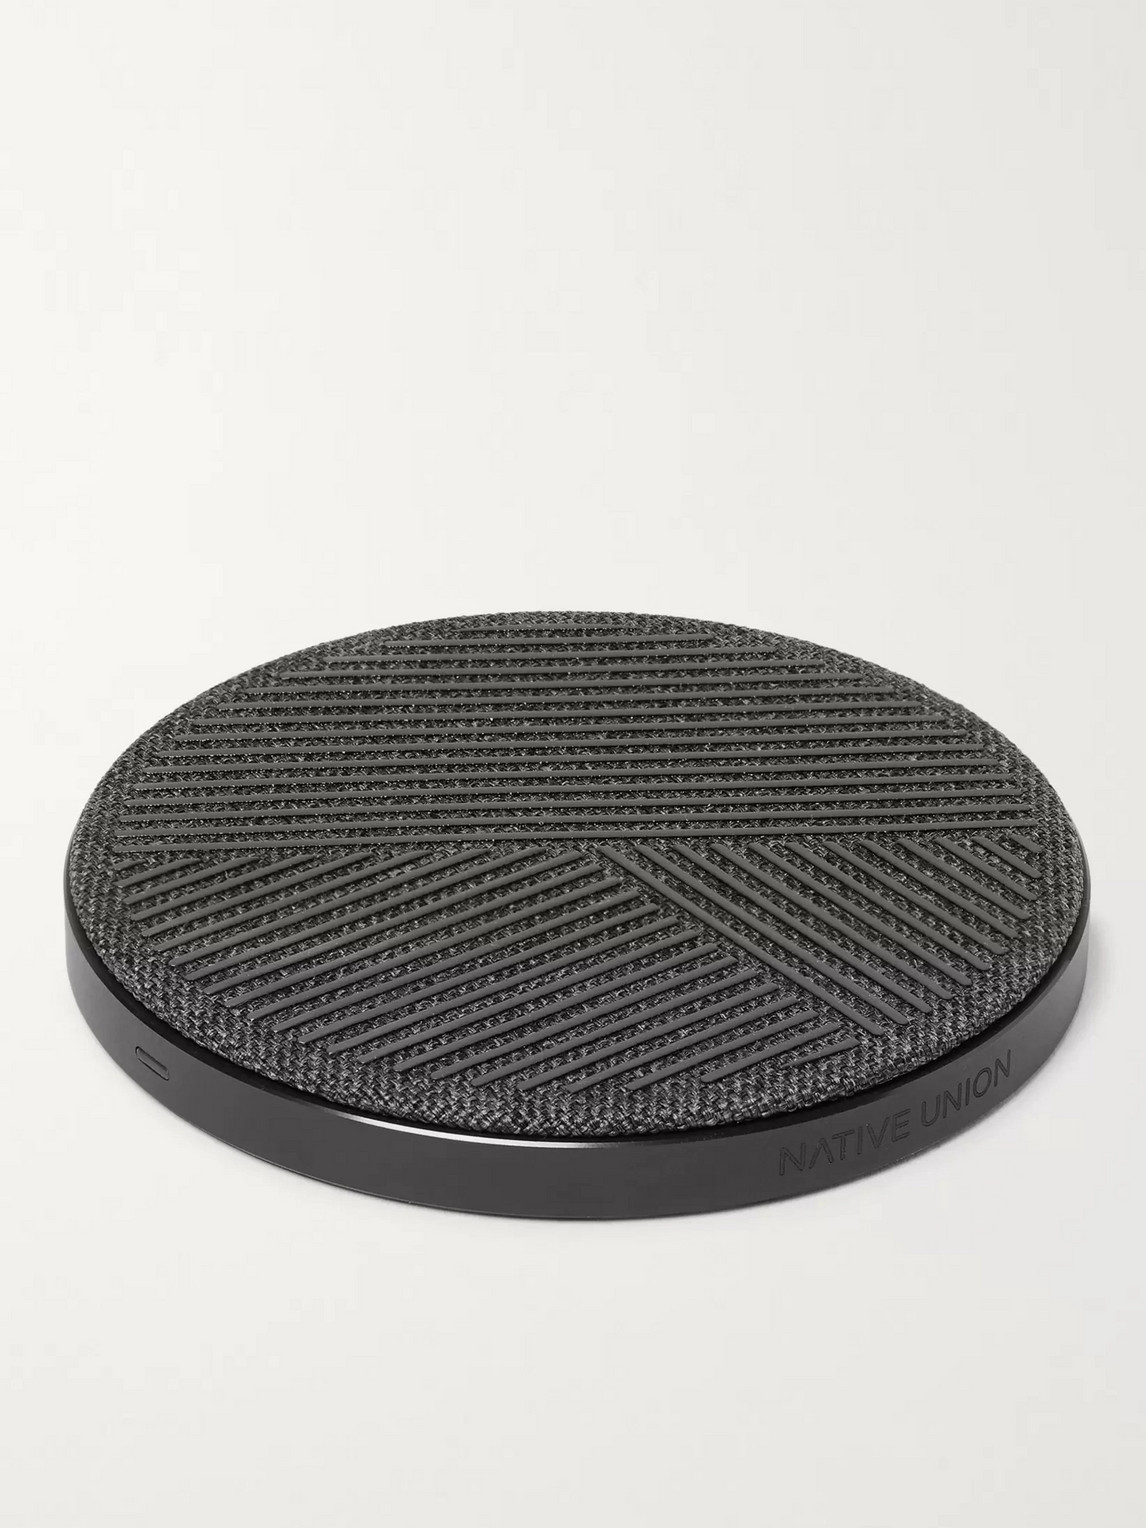 Native Union Drop Wireless Charger In Black